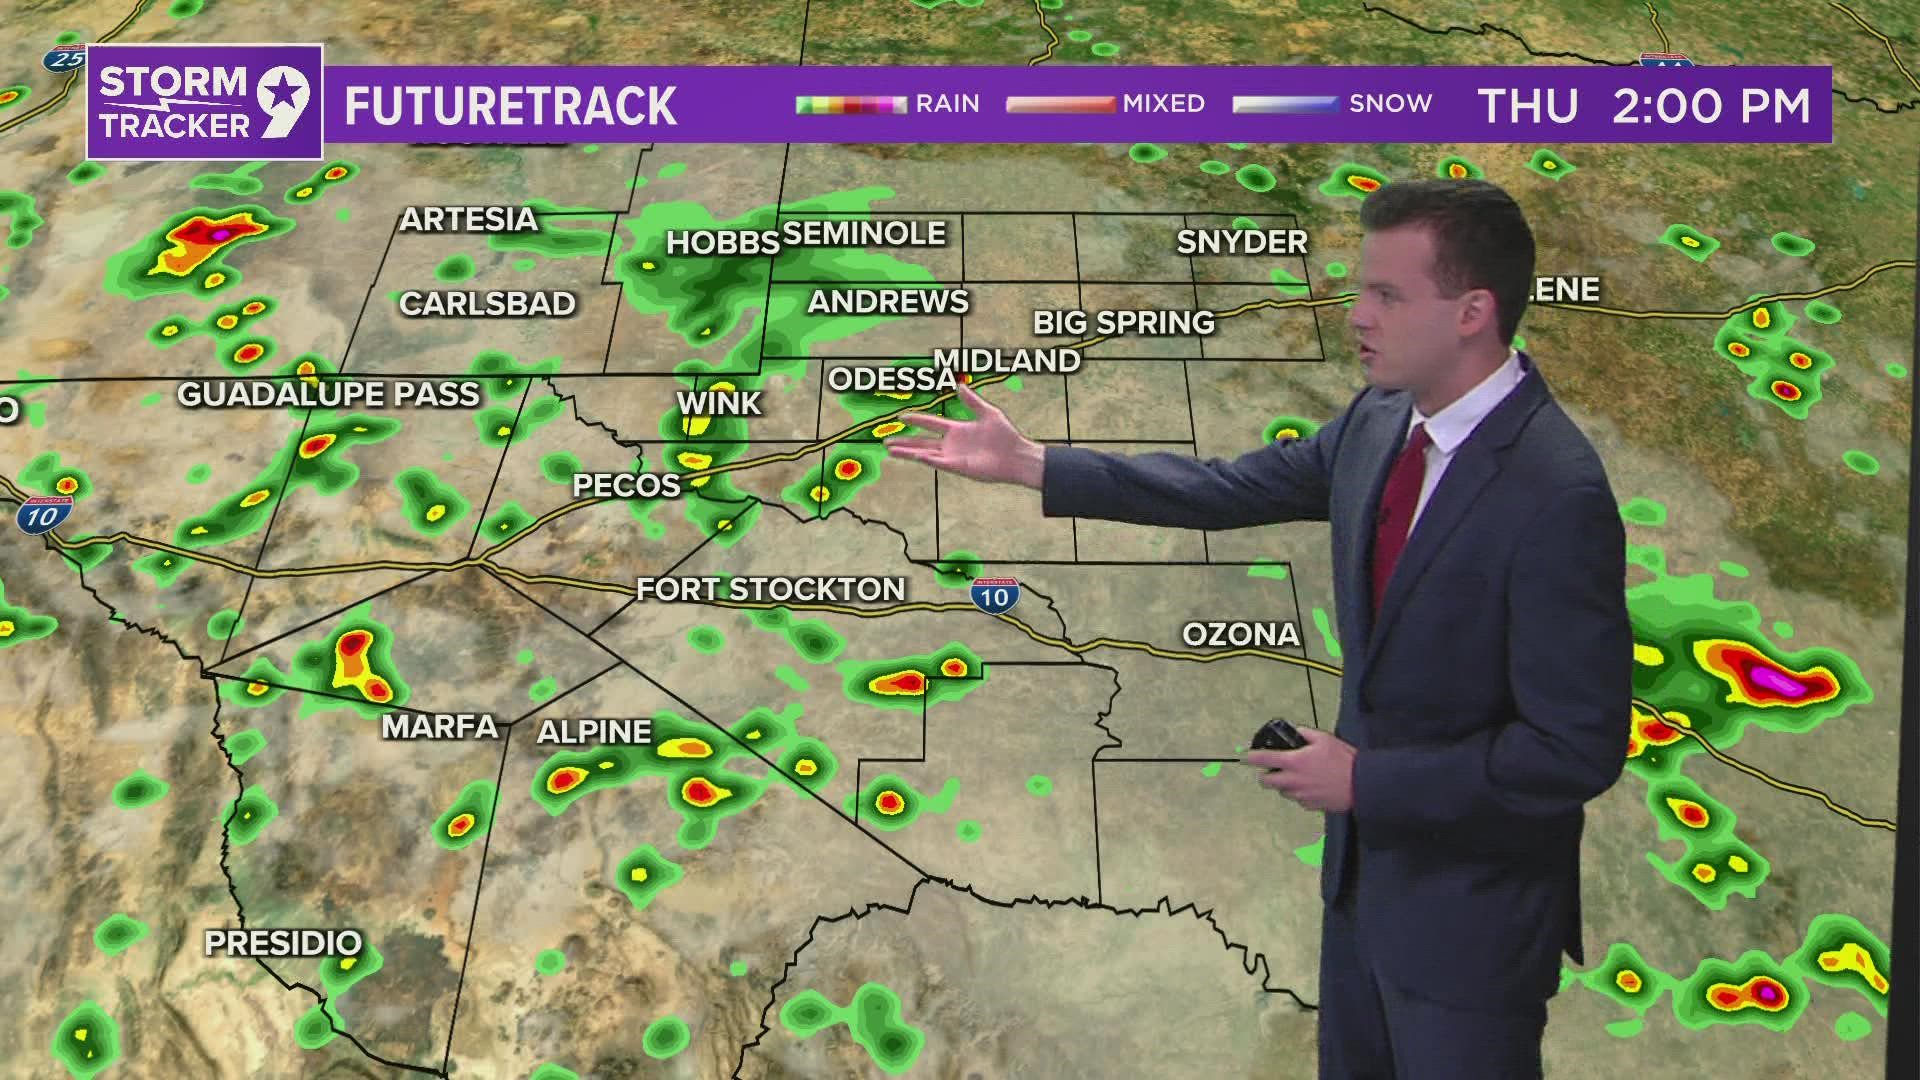 Chance of storms continues on Thursday